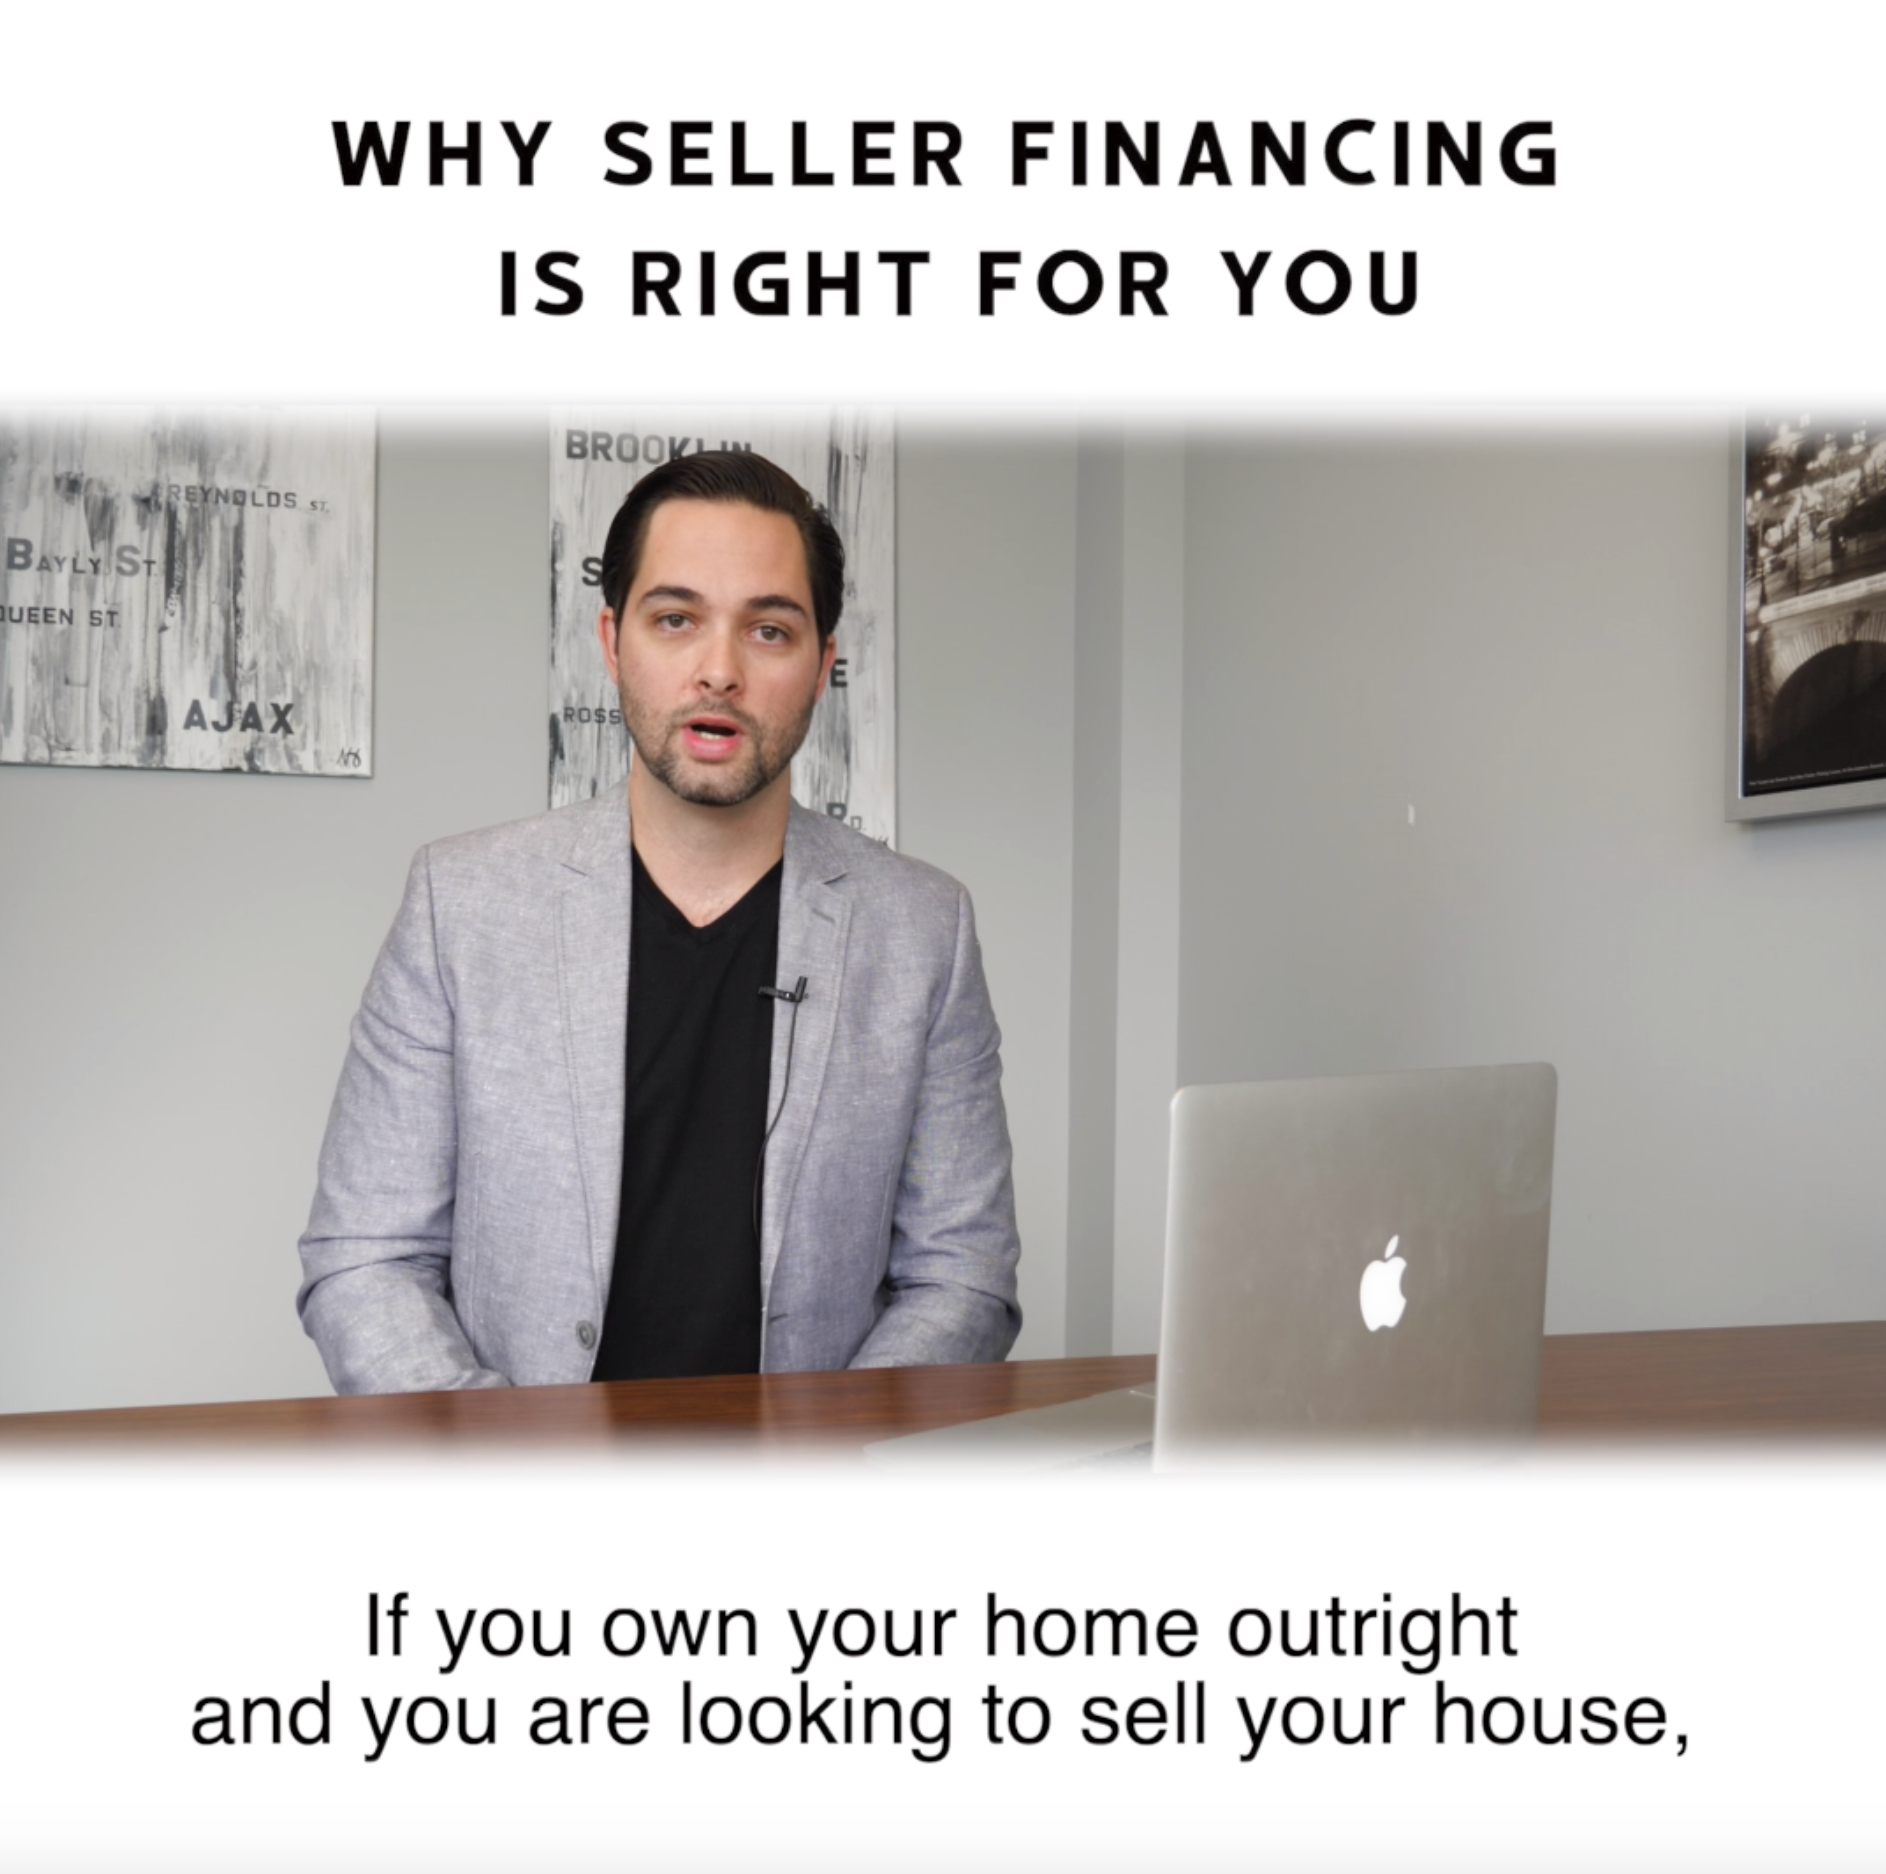 What is seller financing and what are the benefits?